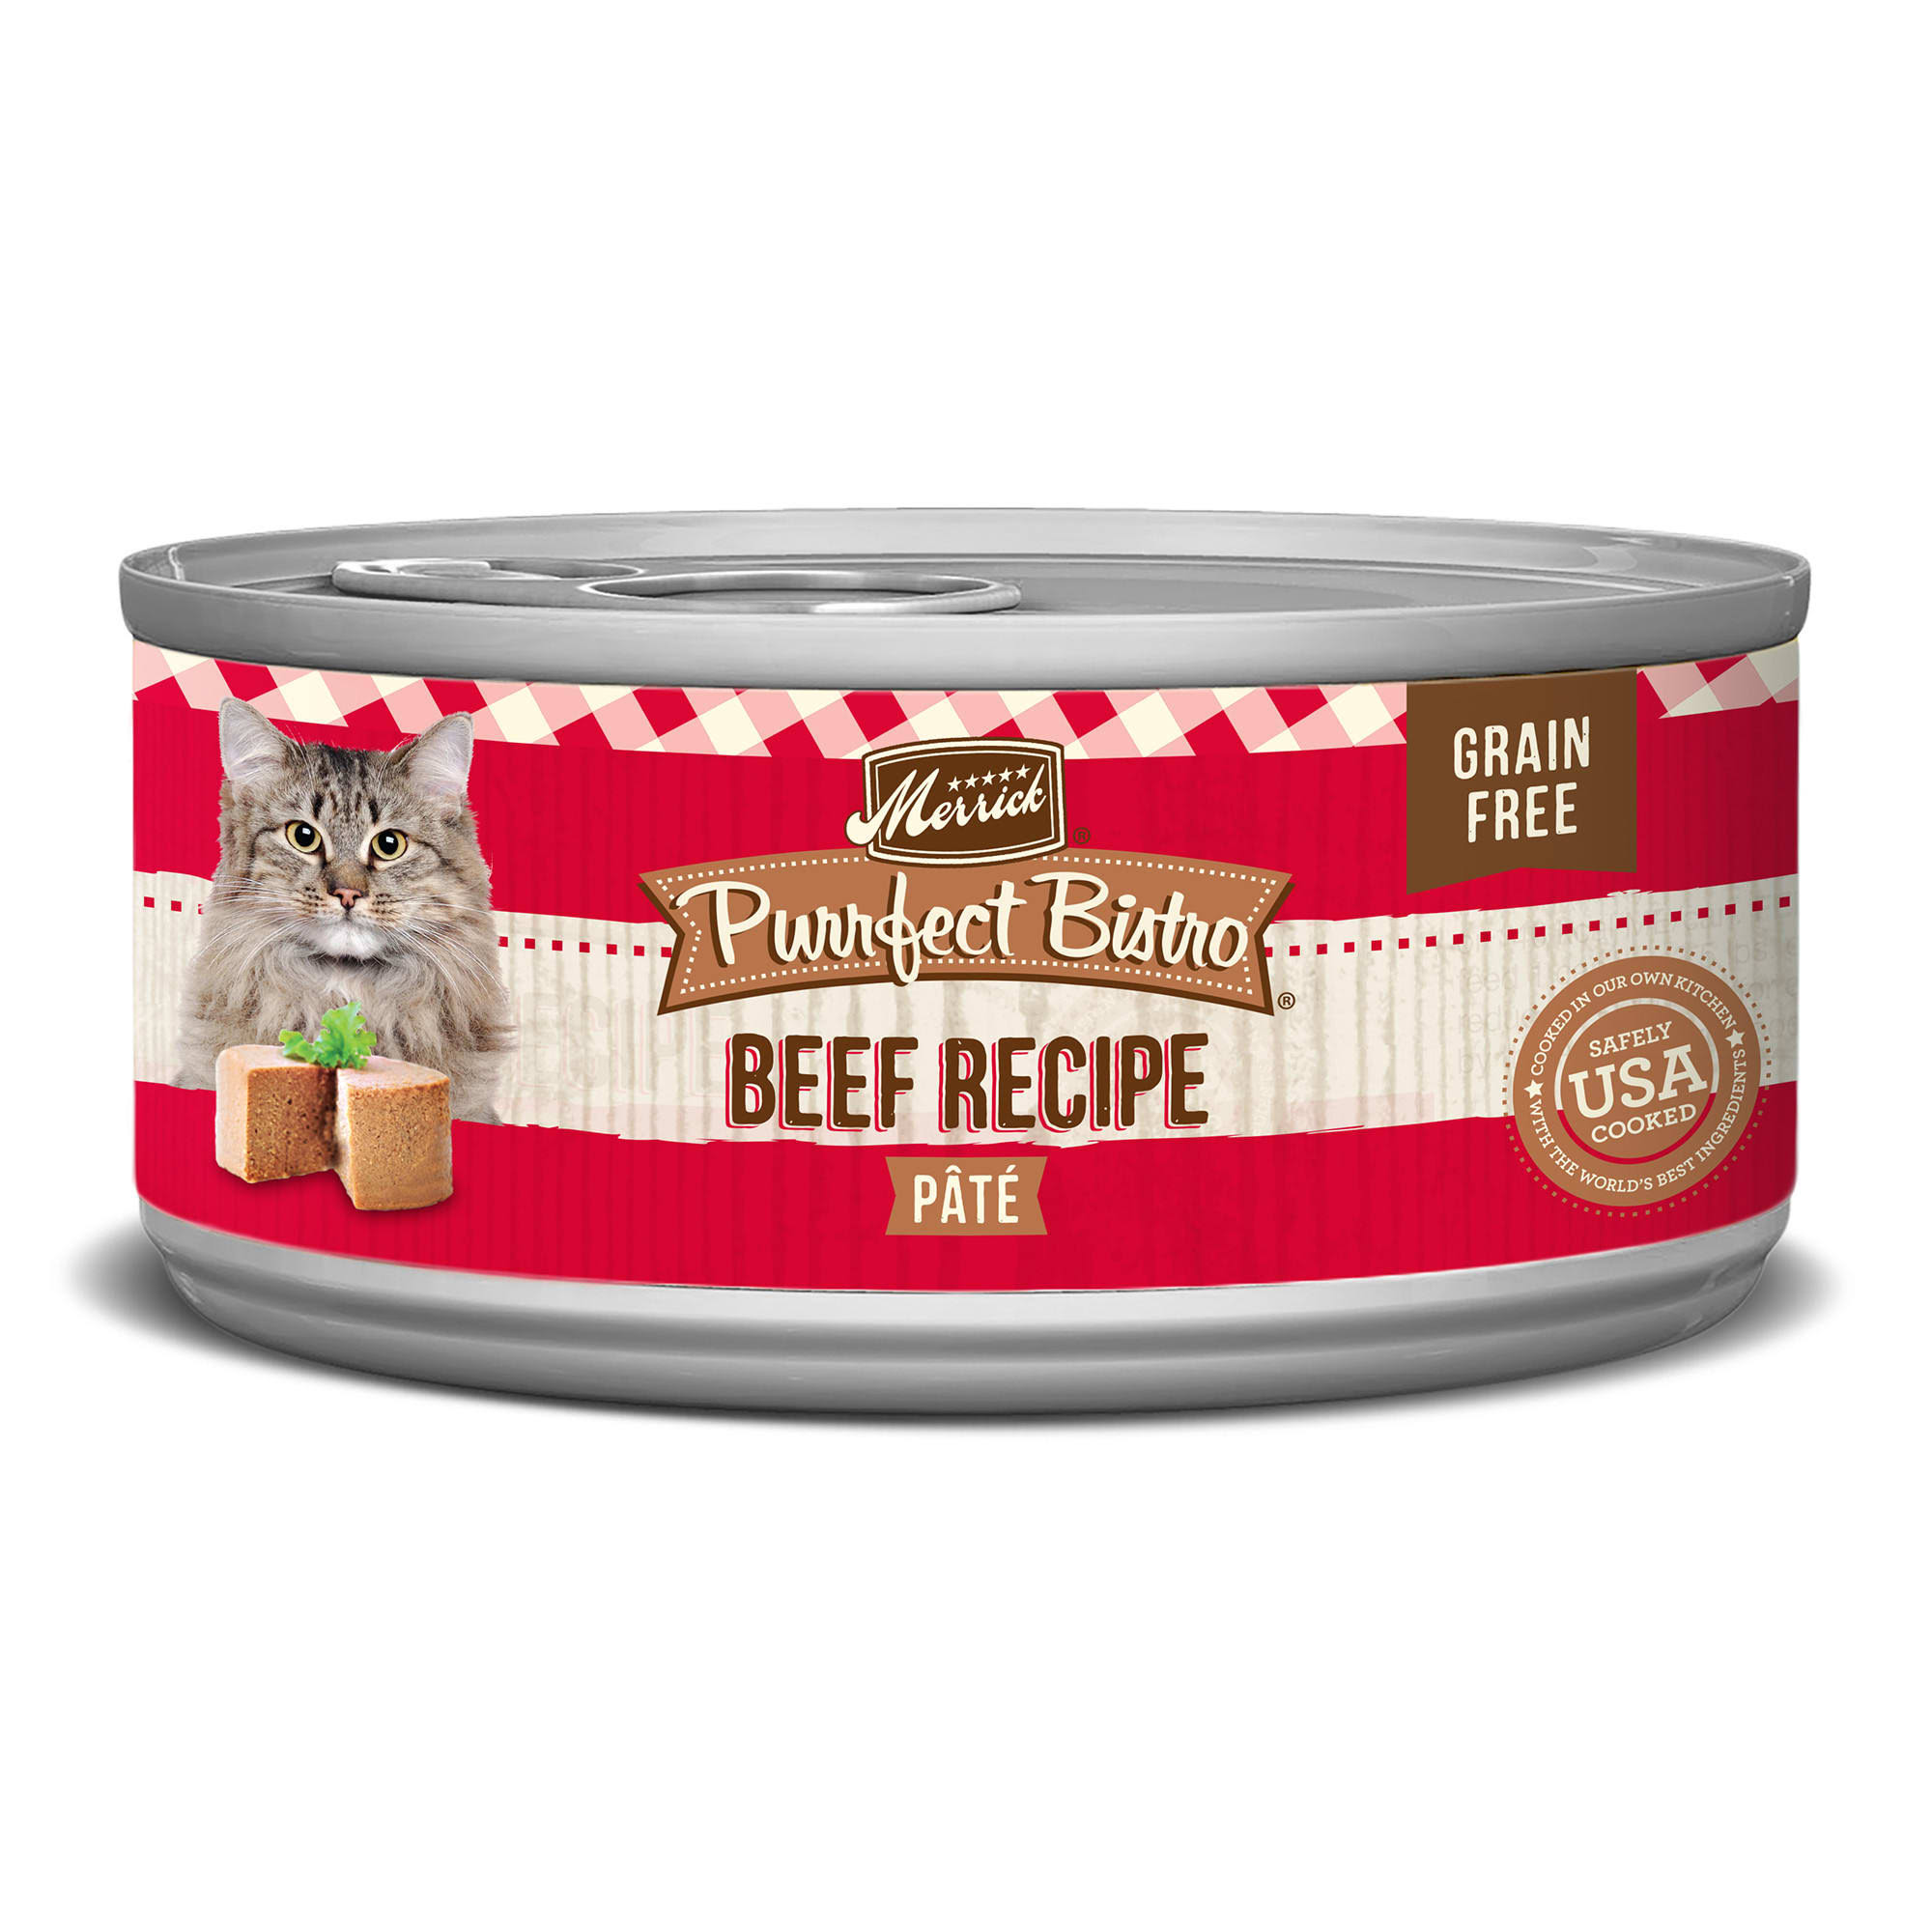 Merrick Purrfect Bistro Grain Free Canned Cat Food - Beef Pate, 5.5oz